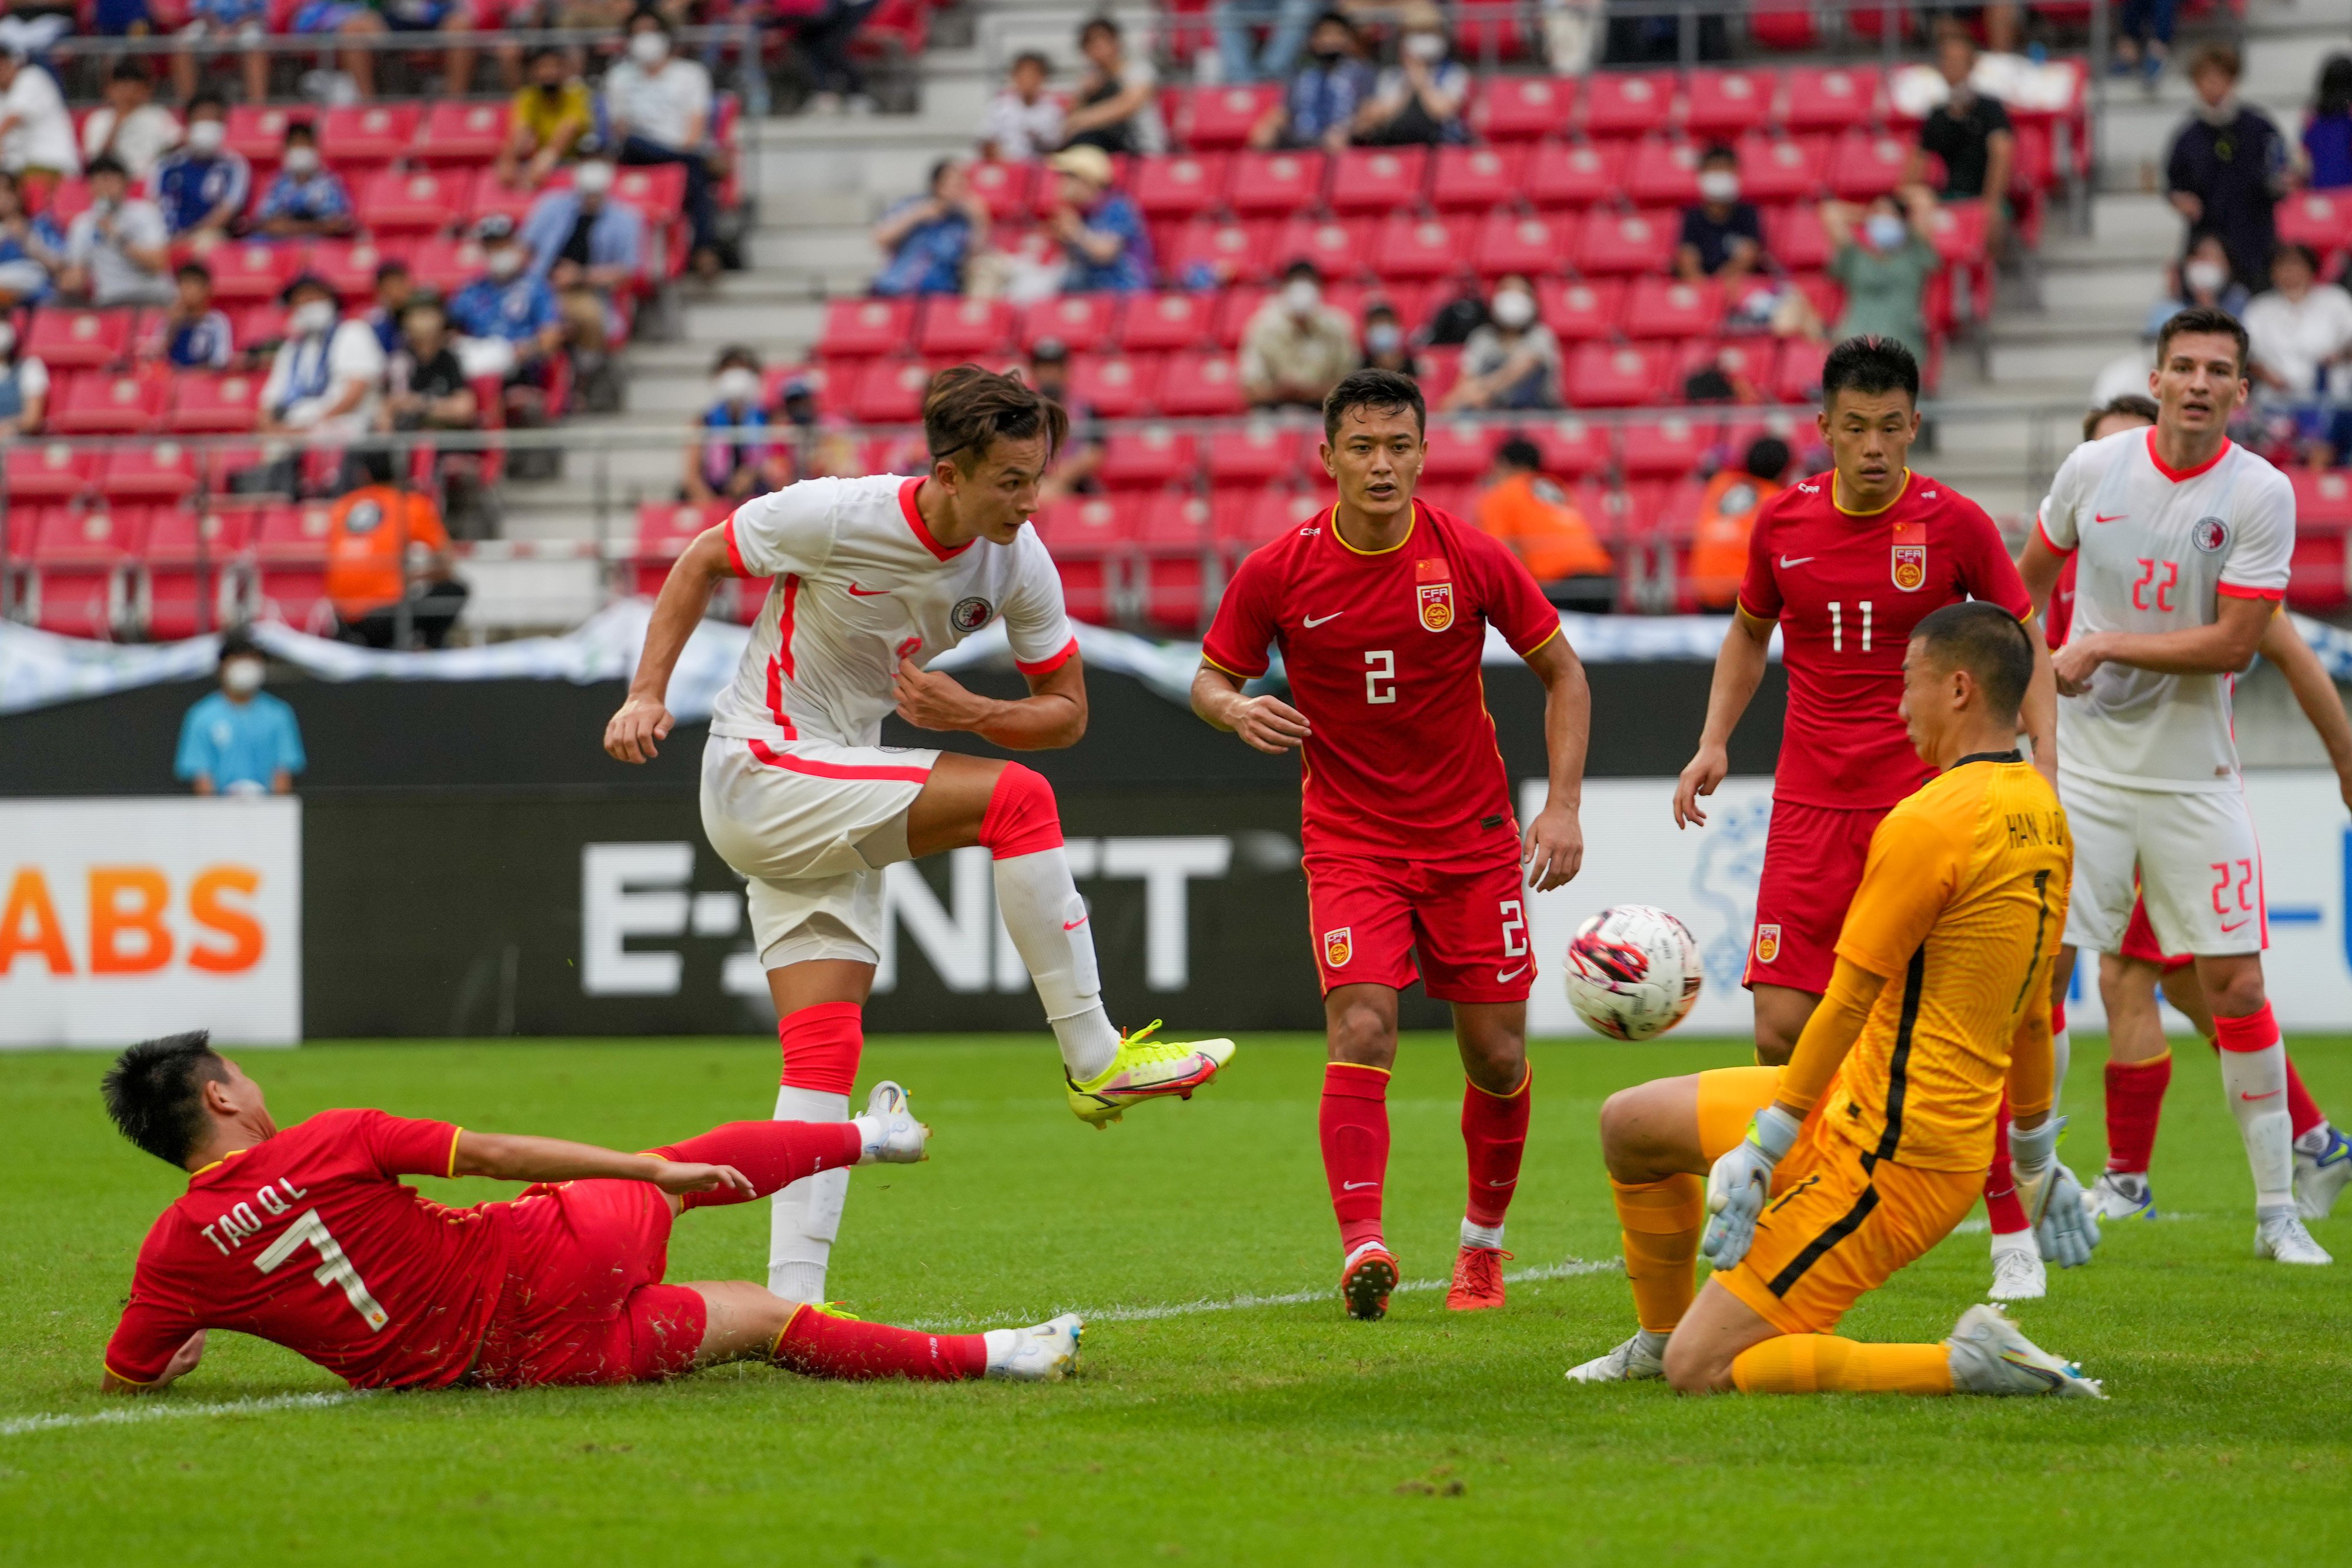 Matt Orr (left) has a shot blocked by China goalkeeper Han Jiaqi during their side’s clash at the EAFF Championship in Japan on July 27 last year. Photo: Xinhua